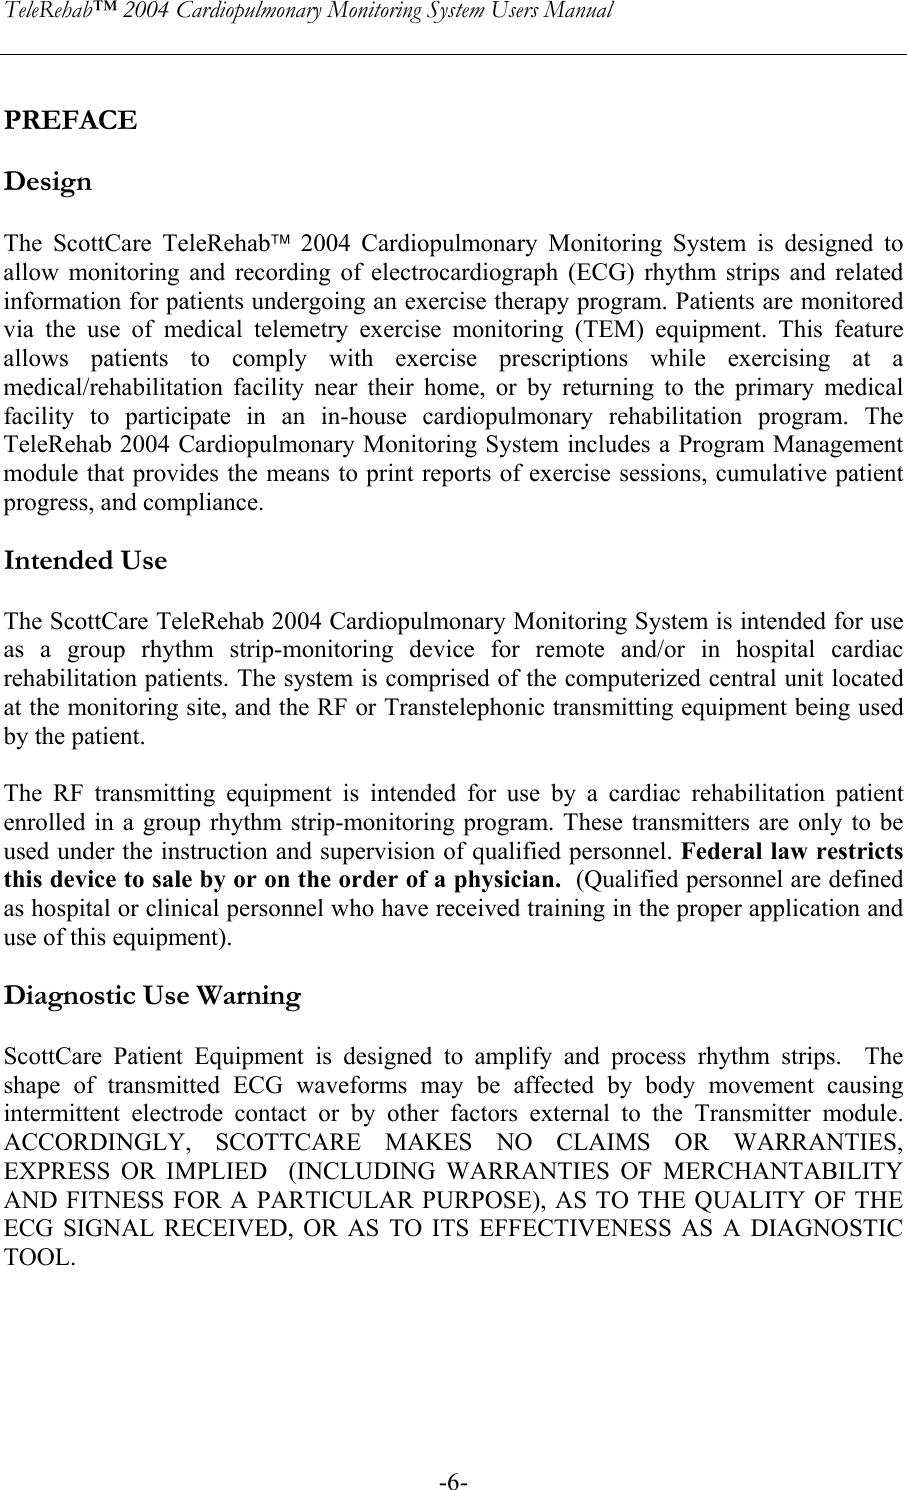 TeleRehab™ 2004 Cardiopulmonary Monitoring System Users Manual    -6- PREFACE  Design  The ScottCare TeleRehab 2004 Cardiopulmonary Monitoring System is designed to allow monitoring and recording of electrocardiograph (ECG) rhythm strips and related information for patients undergoing an exercise therapy program. Patients are monitored via the use of medical telemetry exercise monitoring (TEM) equipment. This feature allows patients to comply with exercise prescriptions while exercising at a medical/rehabilitation facility near their home, or by returning to the primary medical facility to participate in an in-house cardiopulmonary rehabilitation program. The TeleRehab 2004 Cardiopulmonary Monitoring System includes a Program Management module that provides the means to print reports of exercise sessions, cumulative patient progress, and compliance.  Intended Use  The ScottCare TeleRehab 2004 Cardiopulmonary Monitoring System is intended for use as a group rhythm strip-monitoring device for remote and/or in hospital cardiac rehabilitation patients. The system is comprised of the computerized central unit located at the monitoring site, and the RF or Transtelephonic transmitting equipment being used by the patient.   The RF transmitting equipment is intended for use by a cardiac rehabilitation patient enrolled in a group rhythm strip-monitoring program. These transmitters are only to be used under the instruction and supervision of qualified personnel. Federal law restricts this device to sale by or on the order of a physician.  (Qualified personnel are defined as hospital or clinical personnel who have received training in the proper application and use of this equipment).  Diagnostic Use Warning  ScottCare Patient Equipment is designed to amplify and process rhythm strips.  The shape of transmitted ECG waveforms may be affected by body movement causing intermittent electrode contact or by other factors external to the Transmitter module.  ACCORDINGLY, SCOTTCARE MAKES NO CLAIMS OR WARRANTIES, EXPRESS OR IMPLIED  (INCLUDING WARRANTIES OF MERCHANTABILITY AND FITNESS FOR A PARTICULAR PURPOSE), AS TO THE QUALITY OF THE ECG SIGNAL RECEIVED, OR AS TO ITS EFFECTIVENESS AS A DIAGNOSTIC TOOL. 